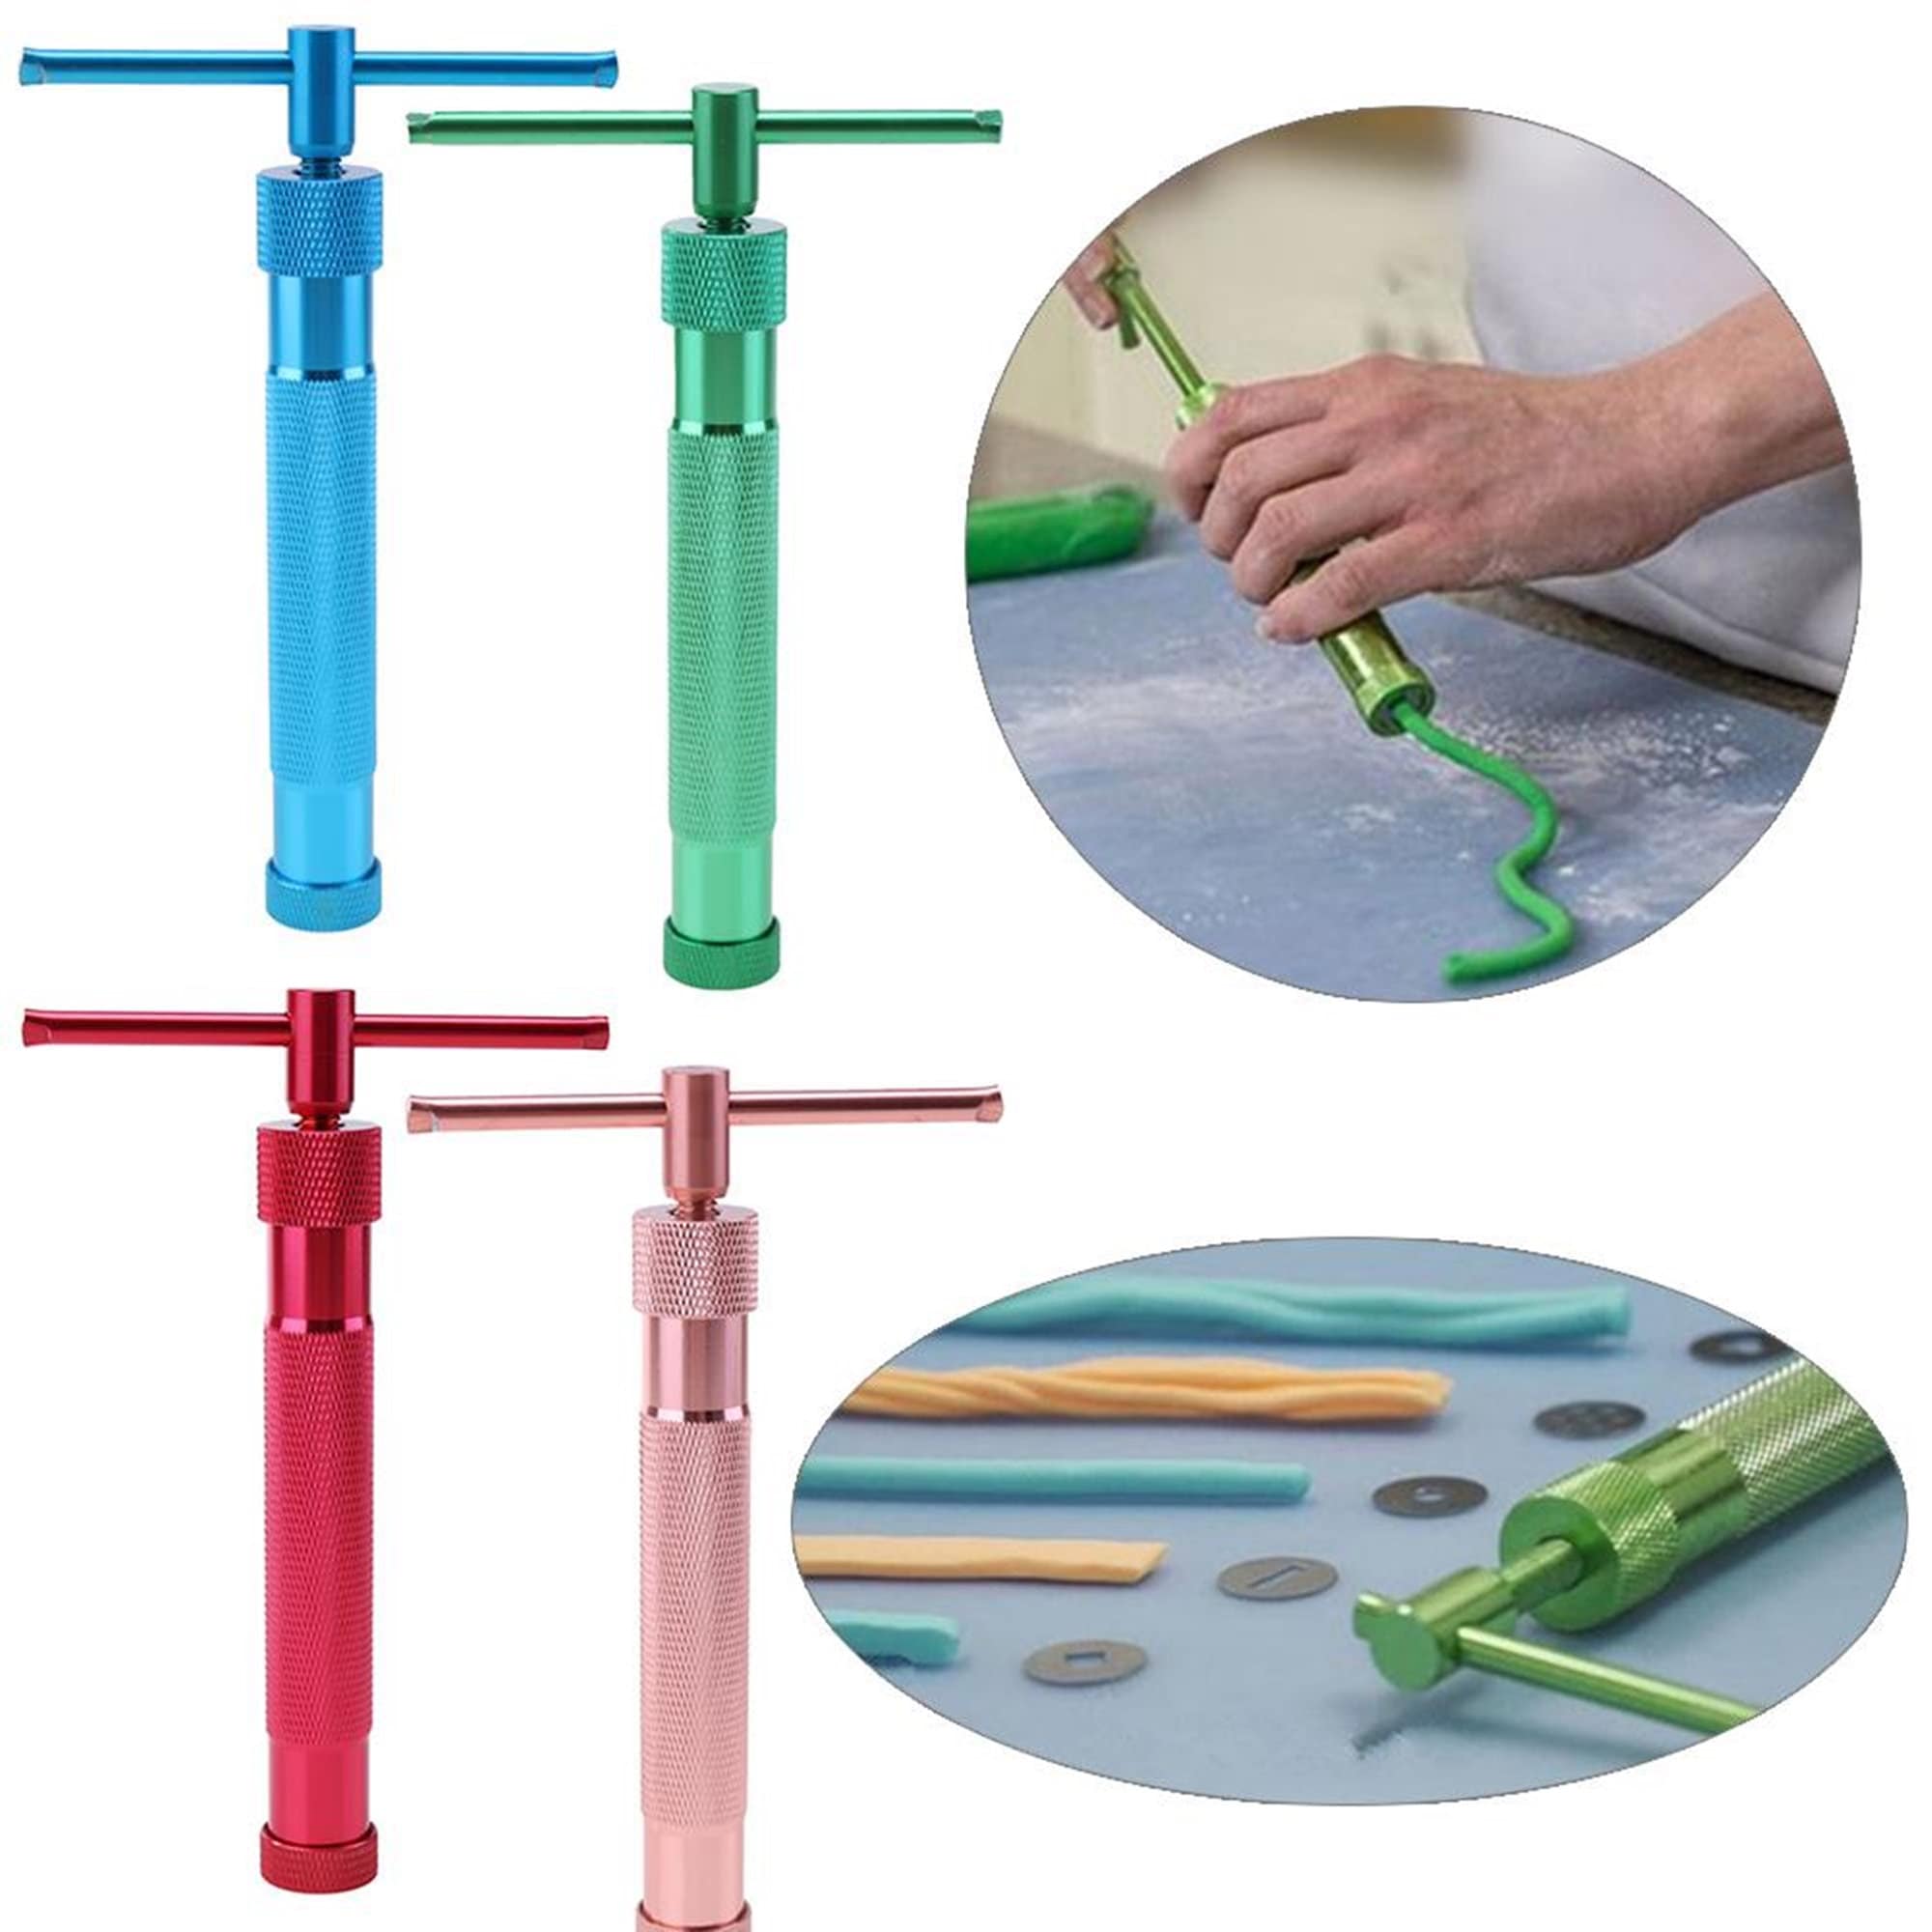 Professional Polymer Clay Extruder Sculpting Tools High Quality